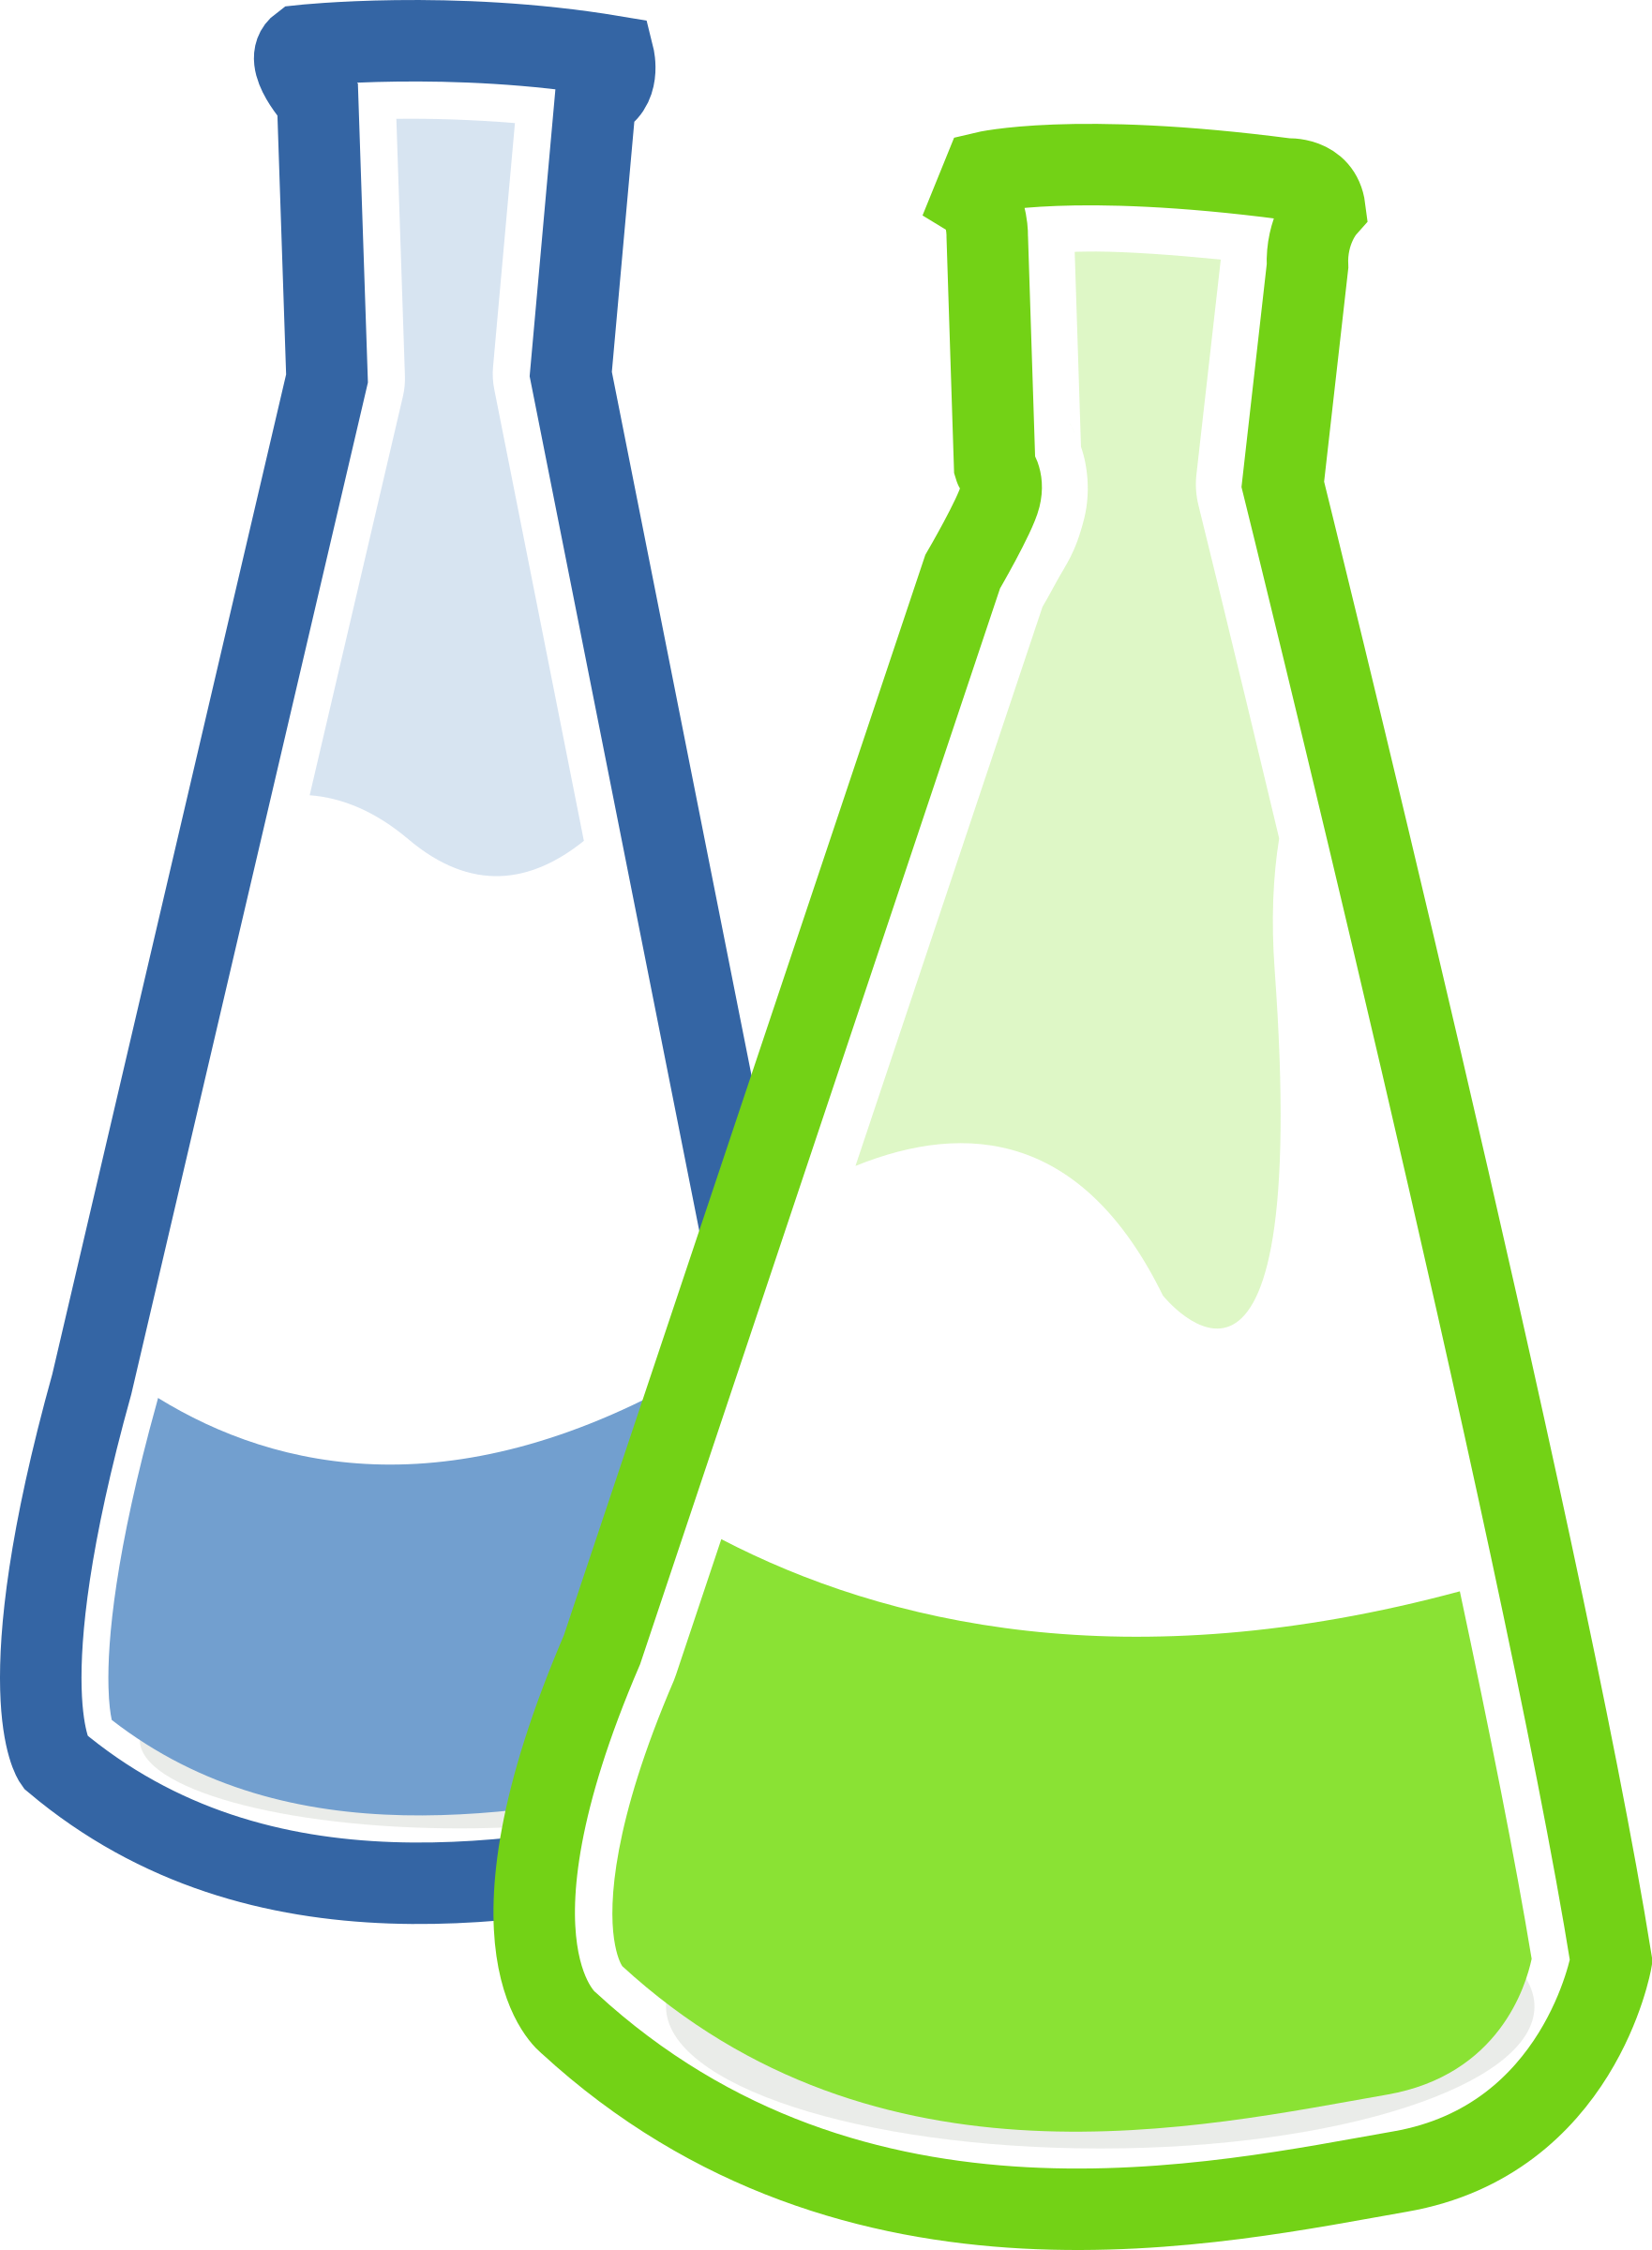 hypothesis clipart laboratory